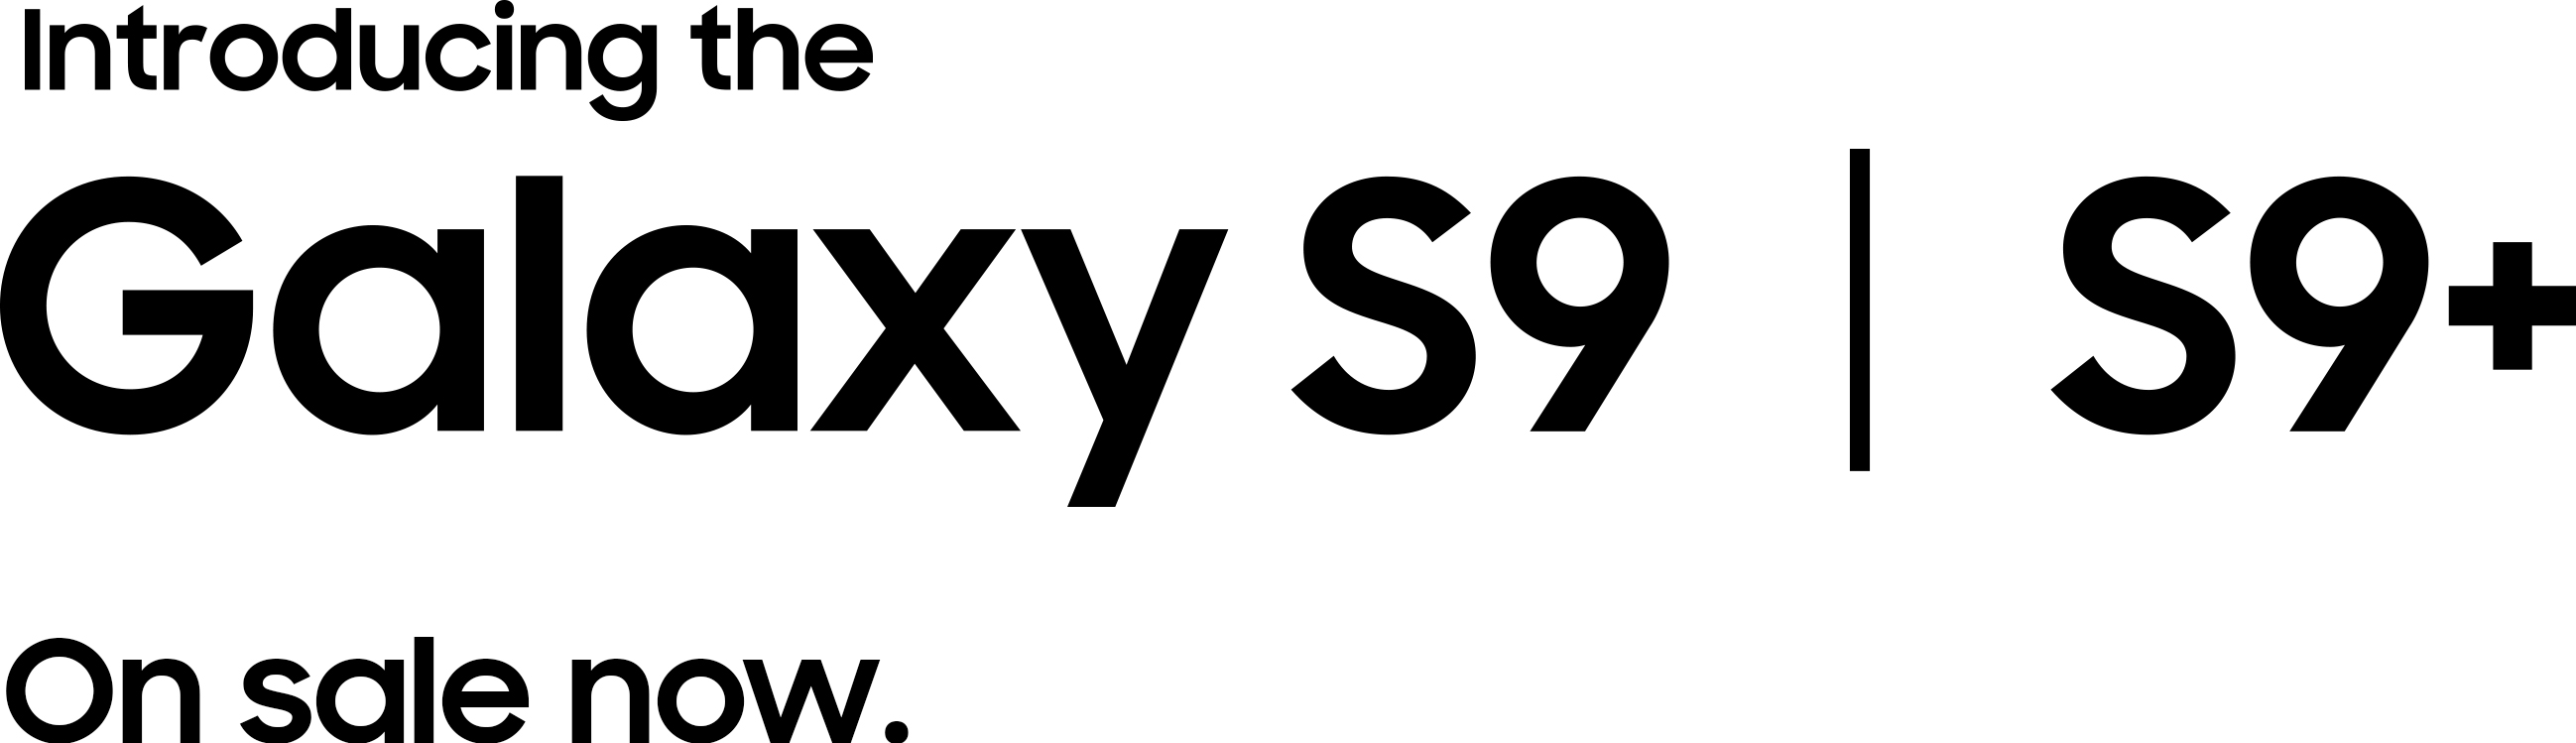 Samsung S9 Logo - Compare Samsung Galaxy S9 Plans | WhistleOut